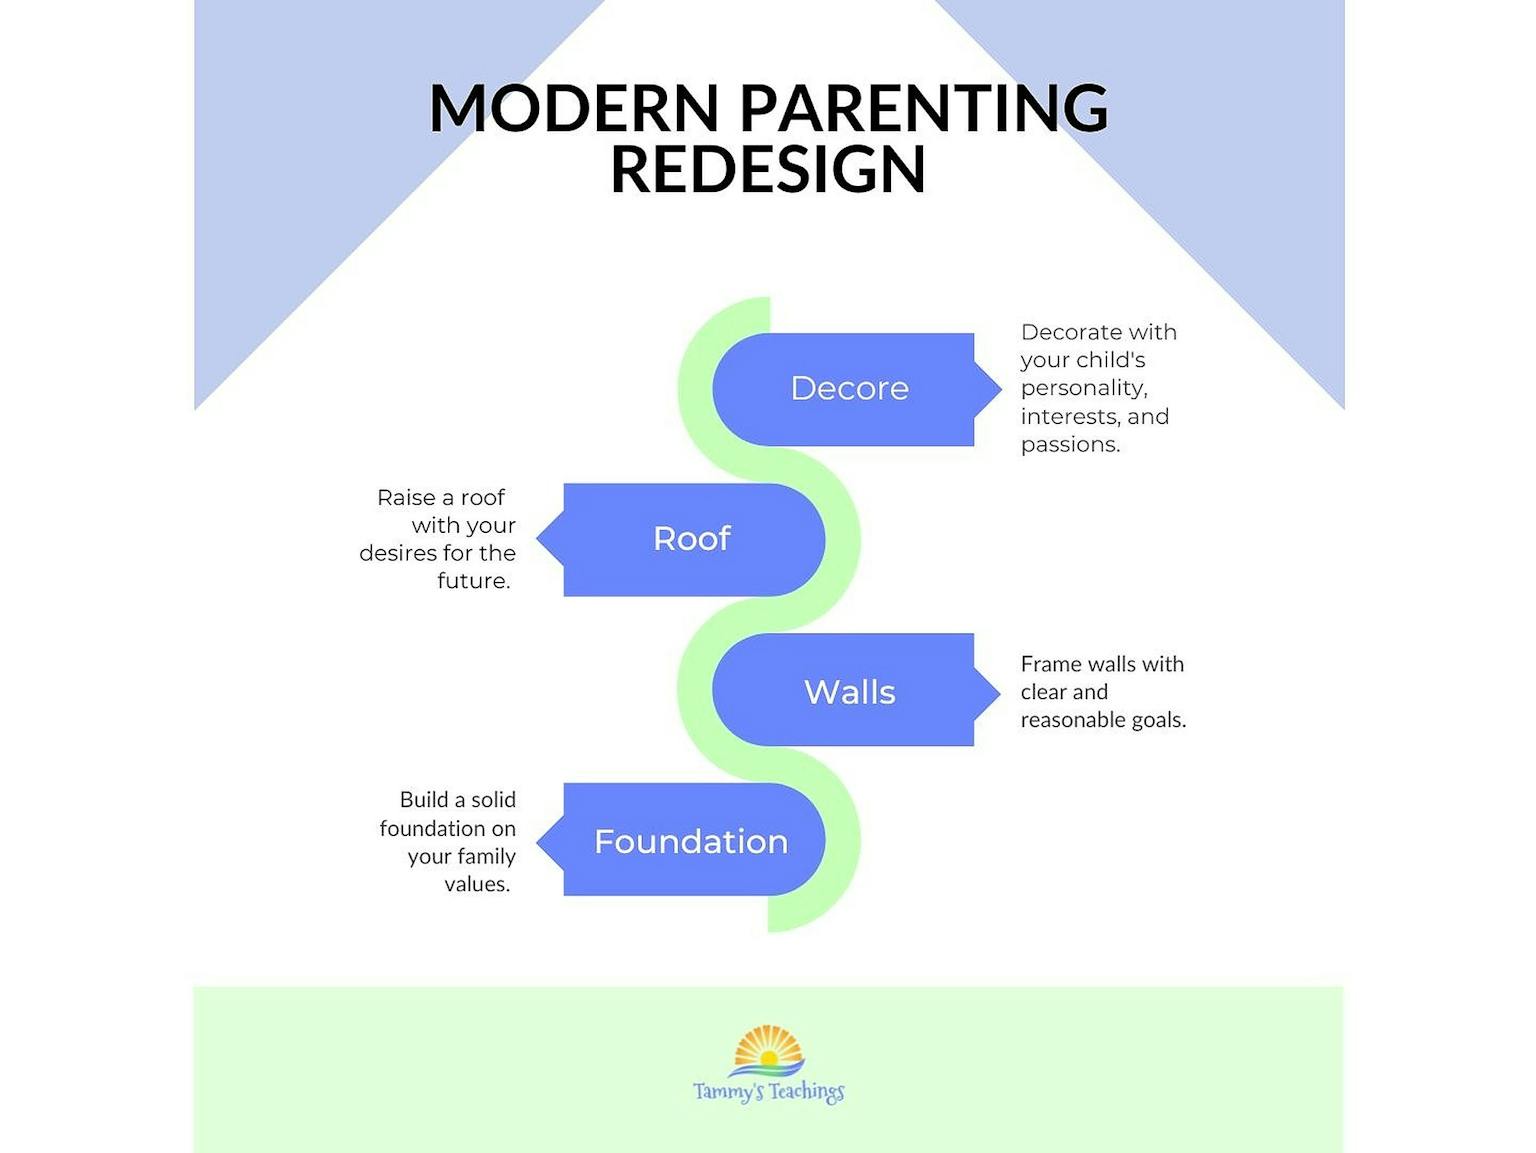 4 Simple Steps to Your New Modern Parenting Plan